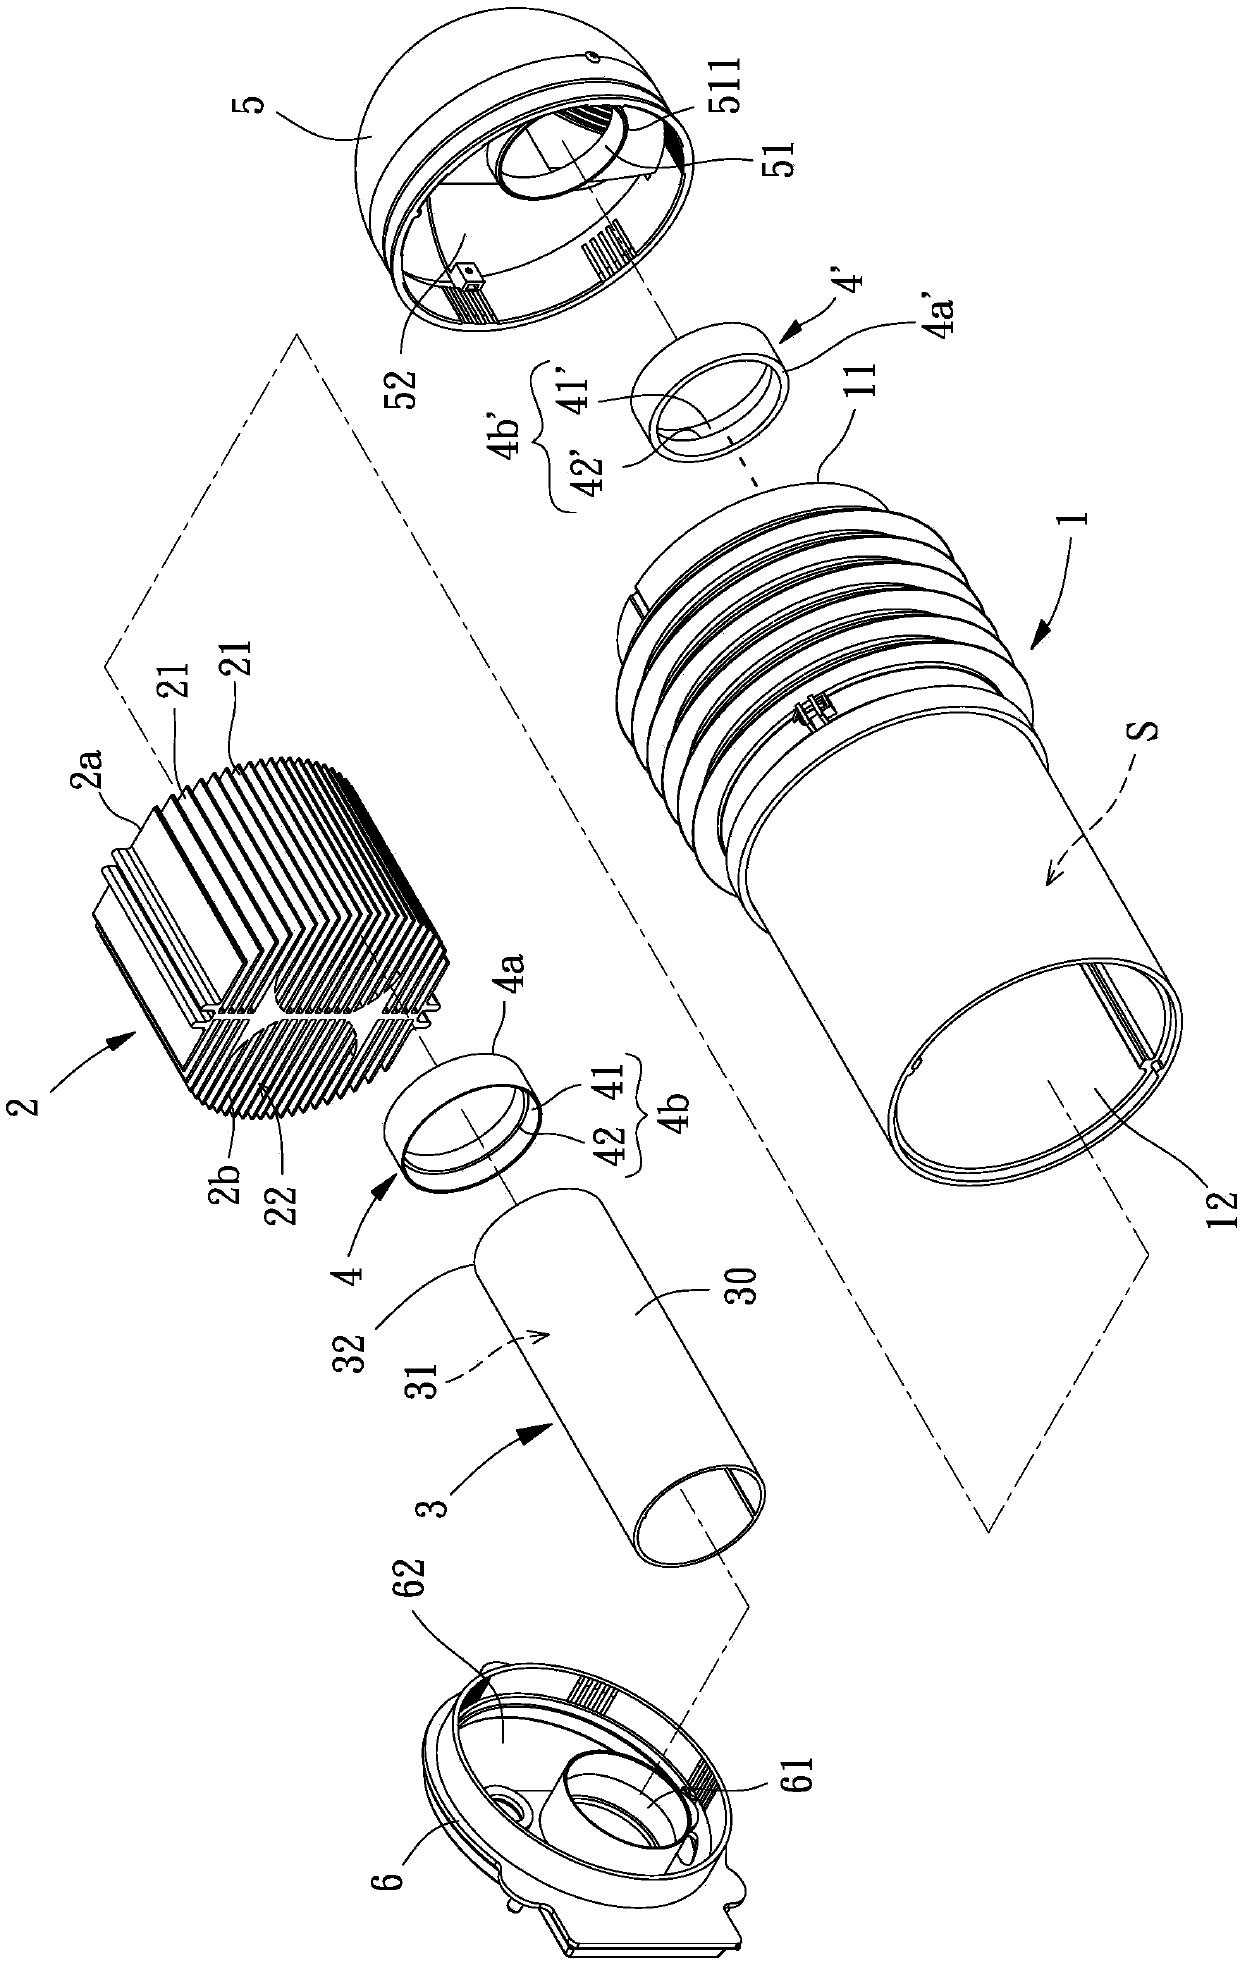 Air guide pipe of airflow exchange device